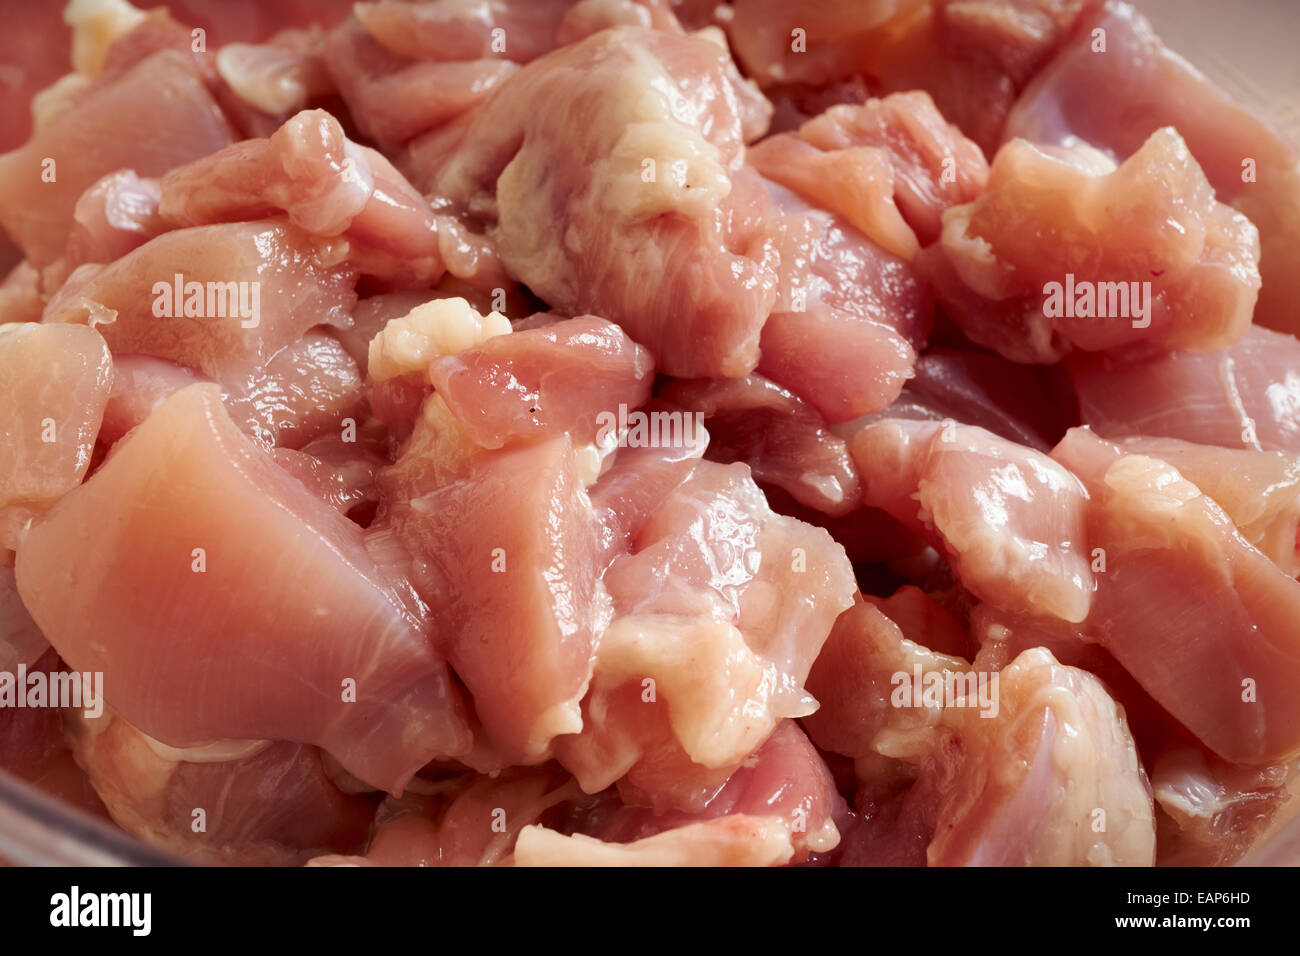 Bits of raw chicken thigh, ready for cooking Stock Photo